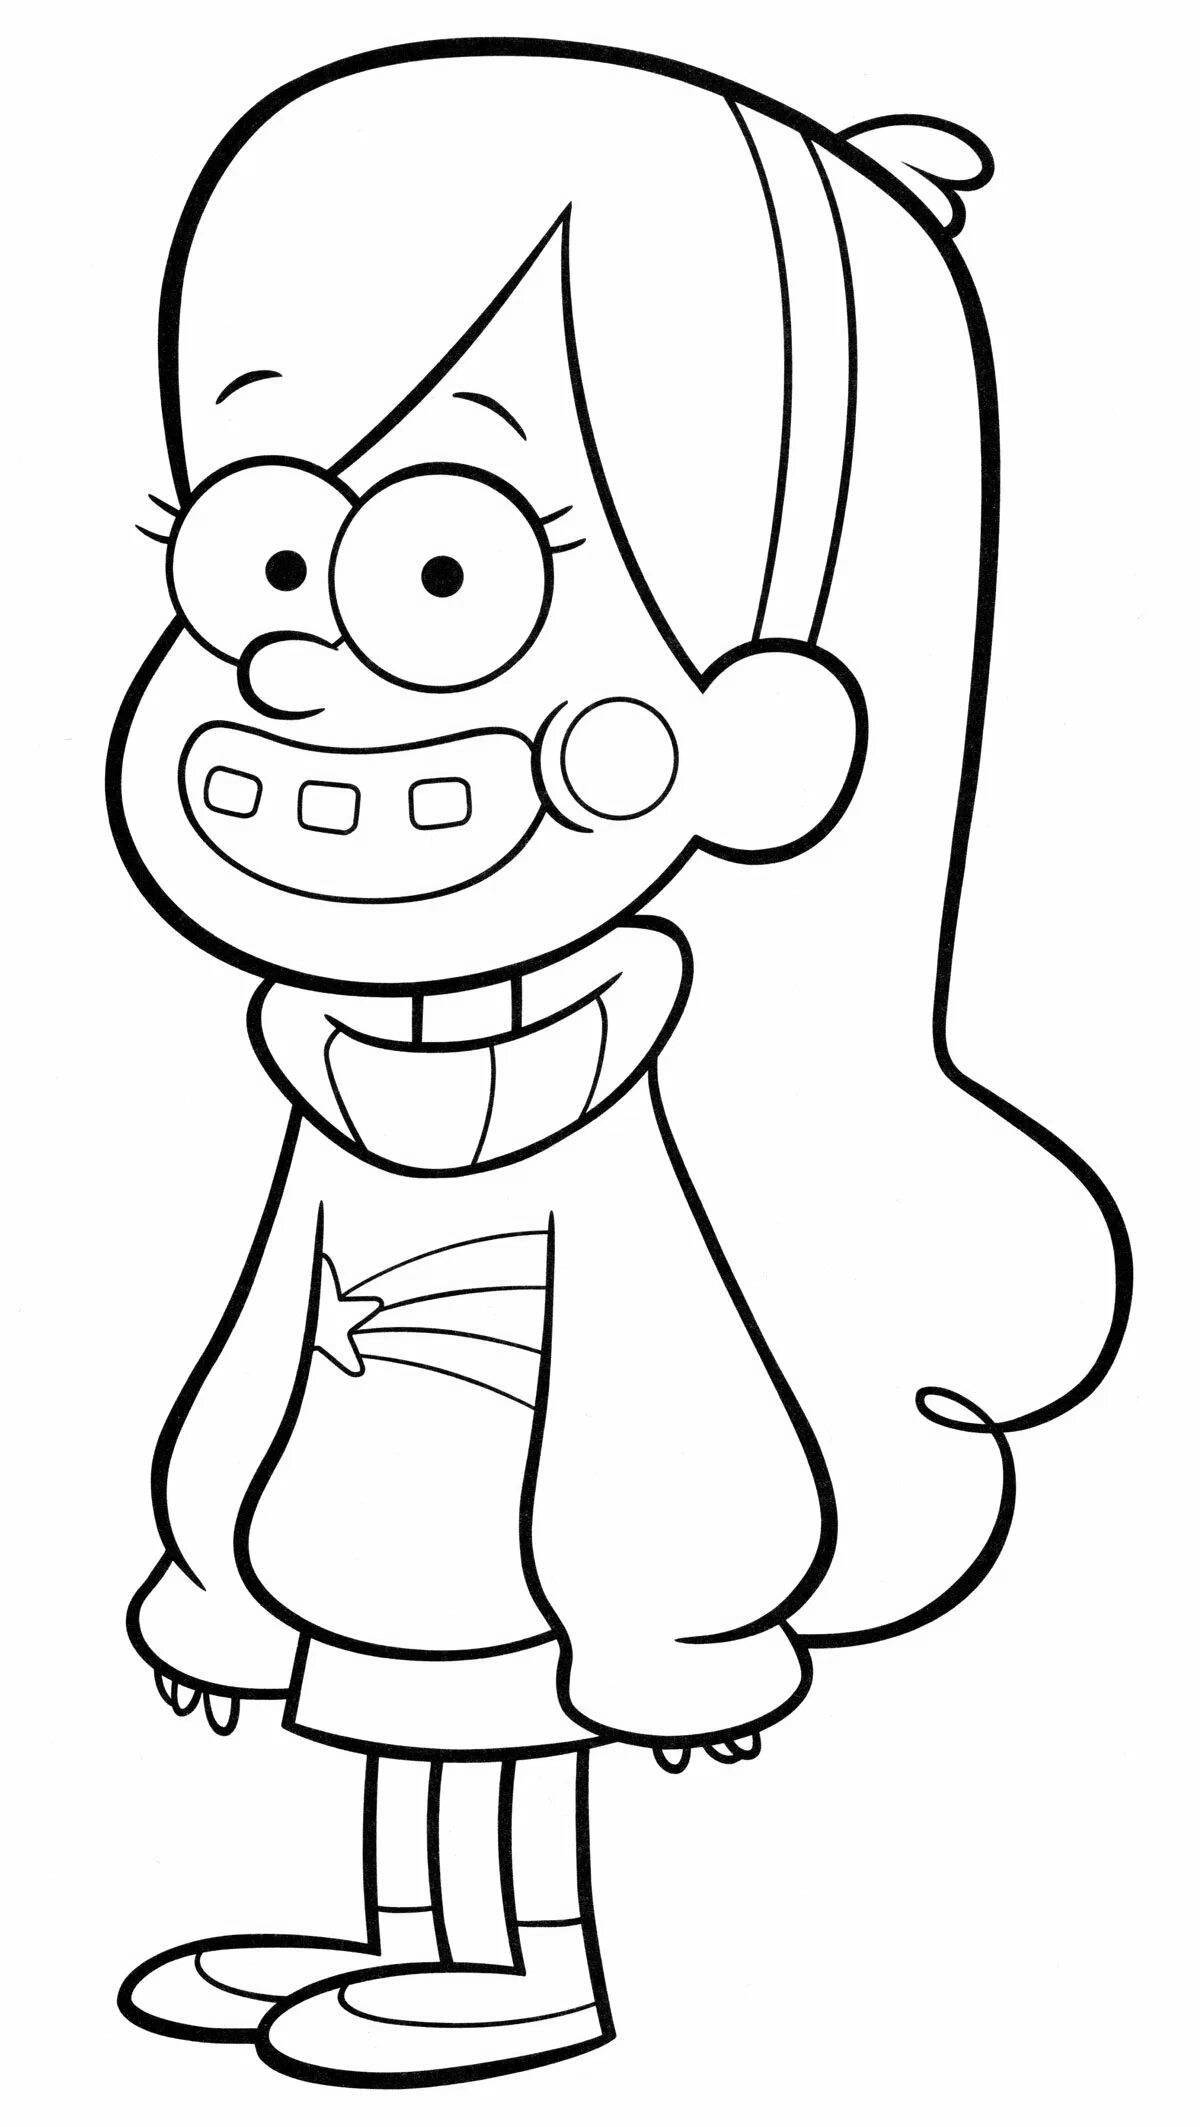 Mabel's hypnotic coloring book